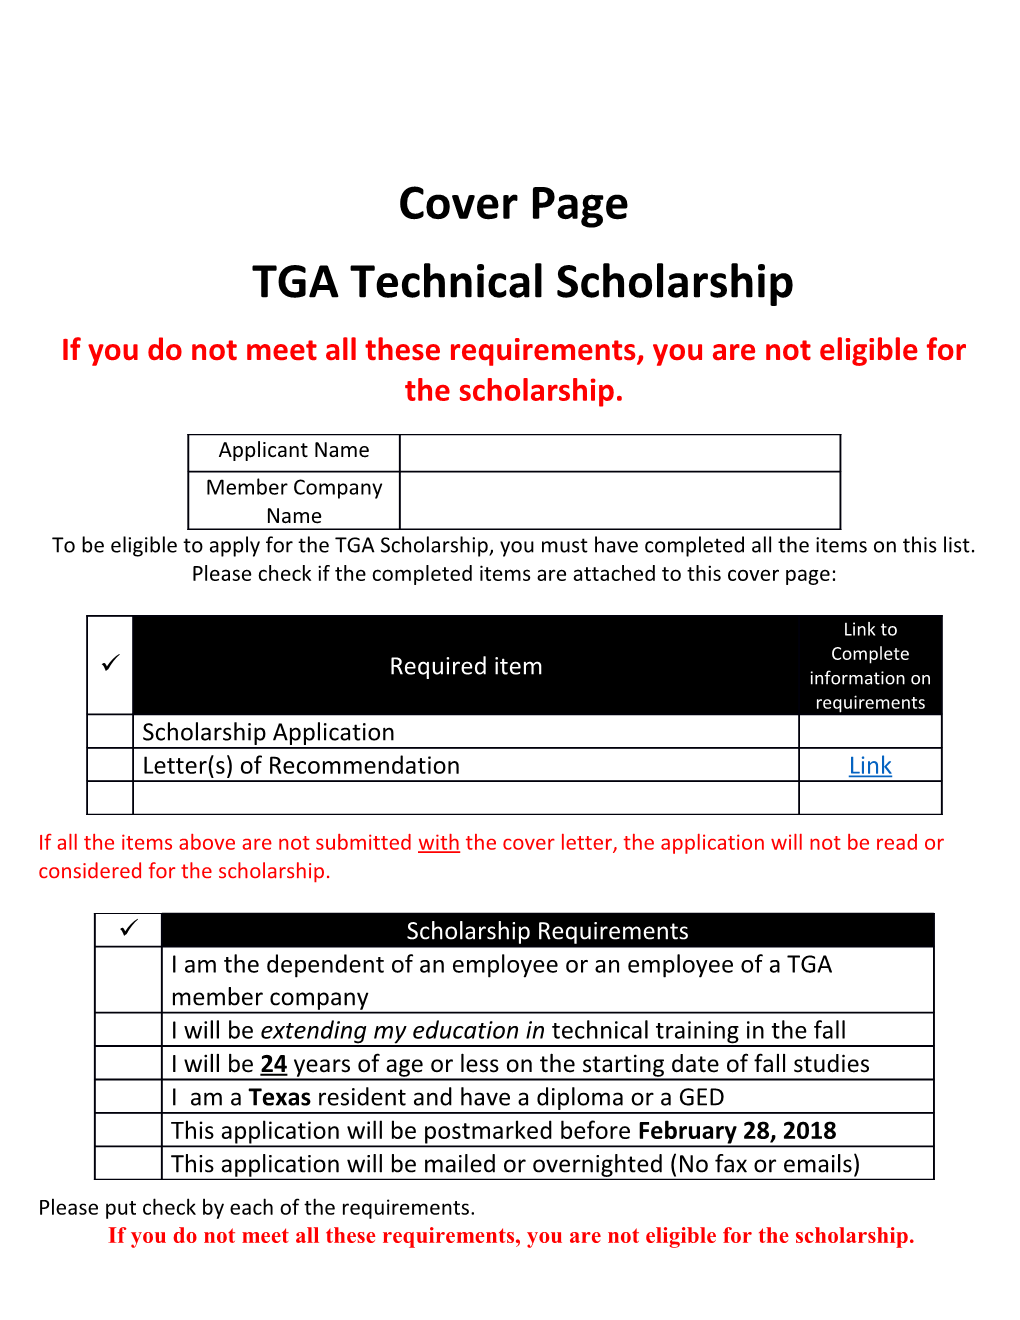 If You Do Not Meet All These Requirements, You Are Not Eligible for the Scholarship